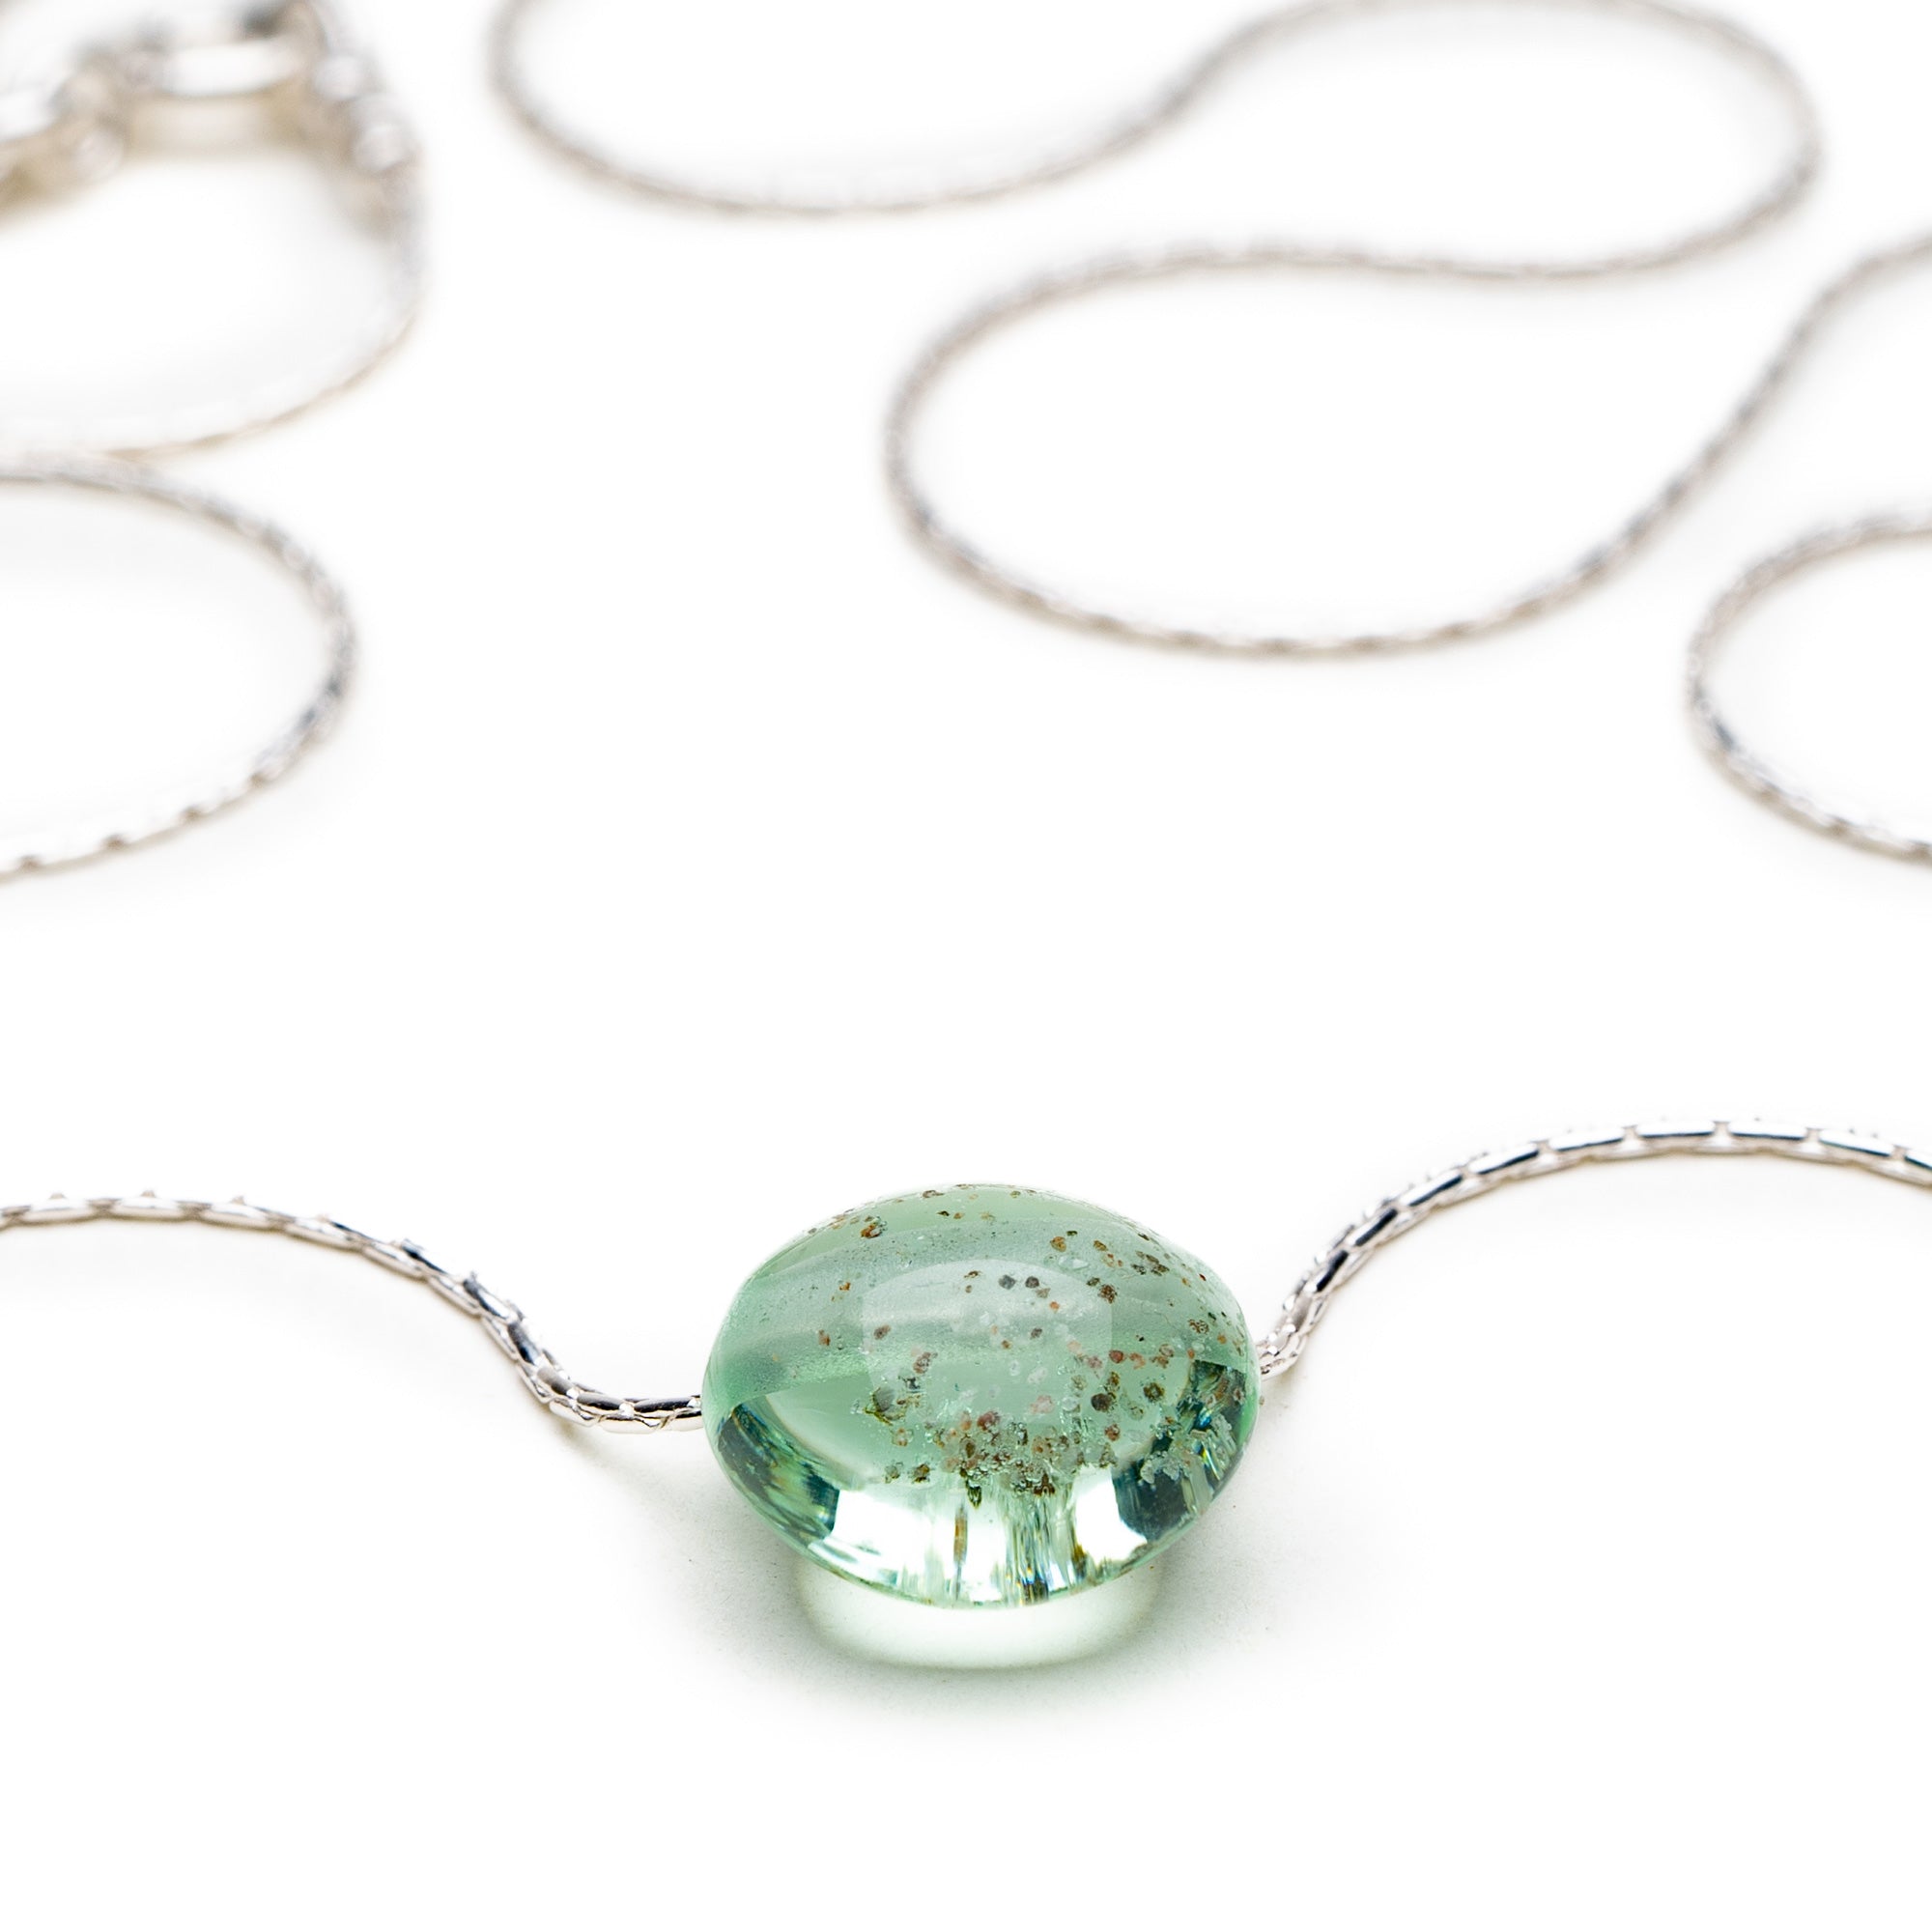 Sea glass green glass pebbel with beach sand melted in on silver chain necklace.